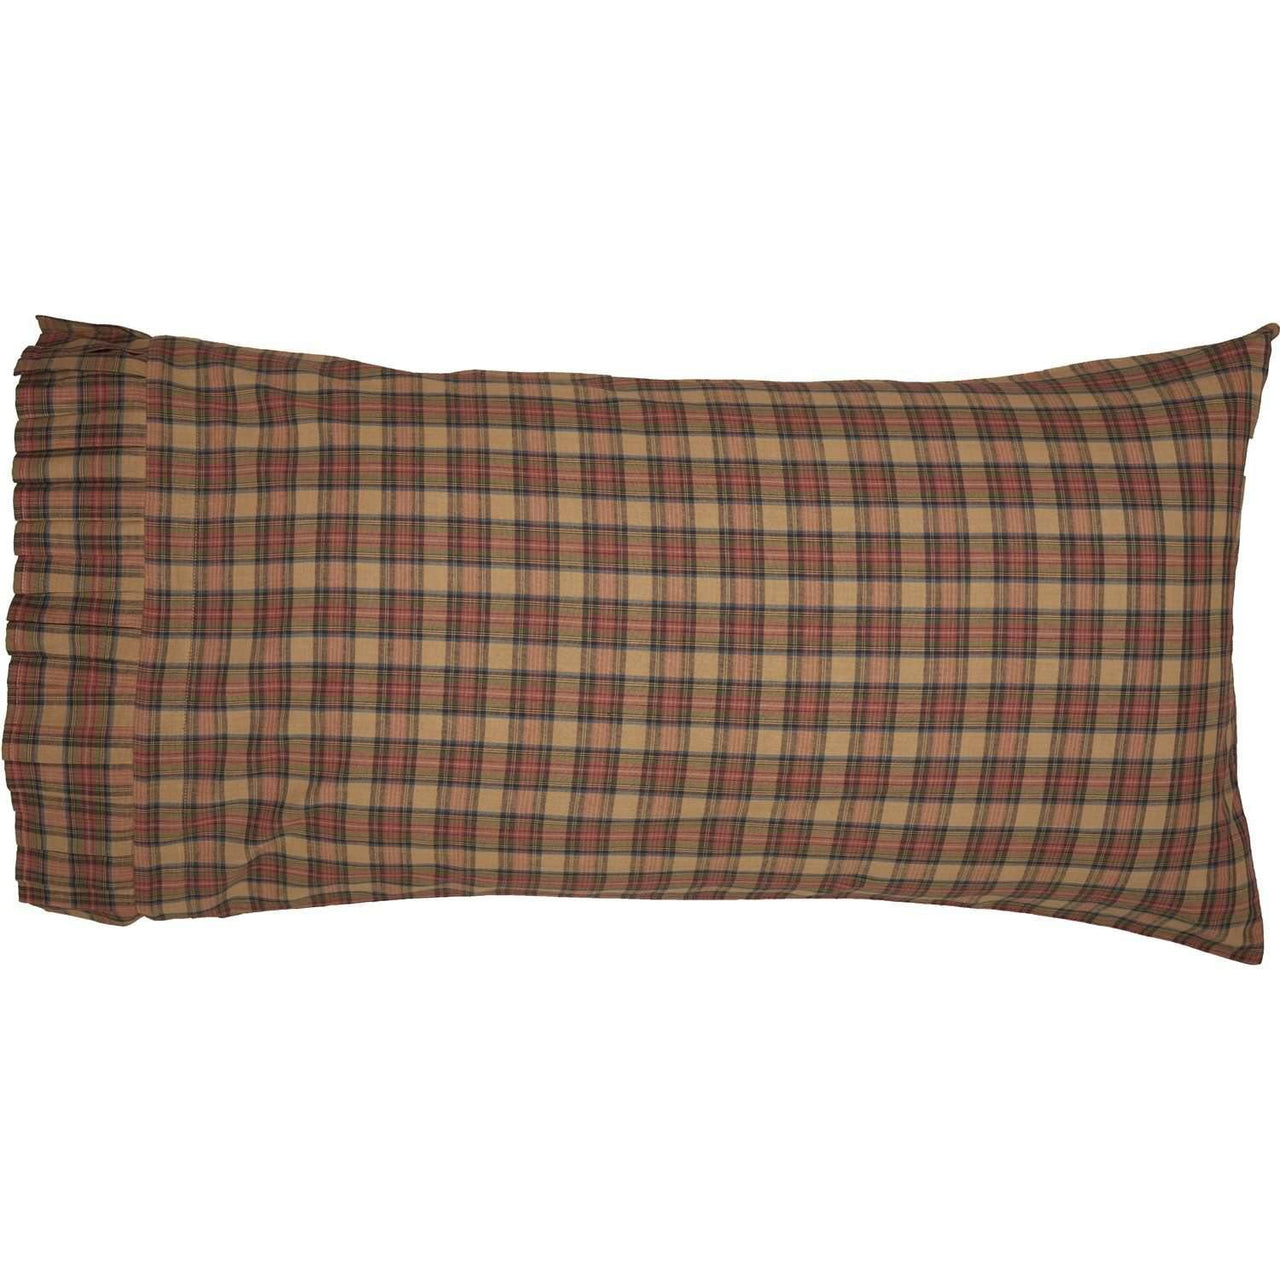 Crosswoods King Pillow Case Set of 2 21x40 VHC Brands - The Fox Decor